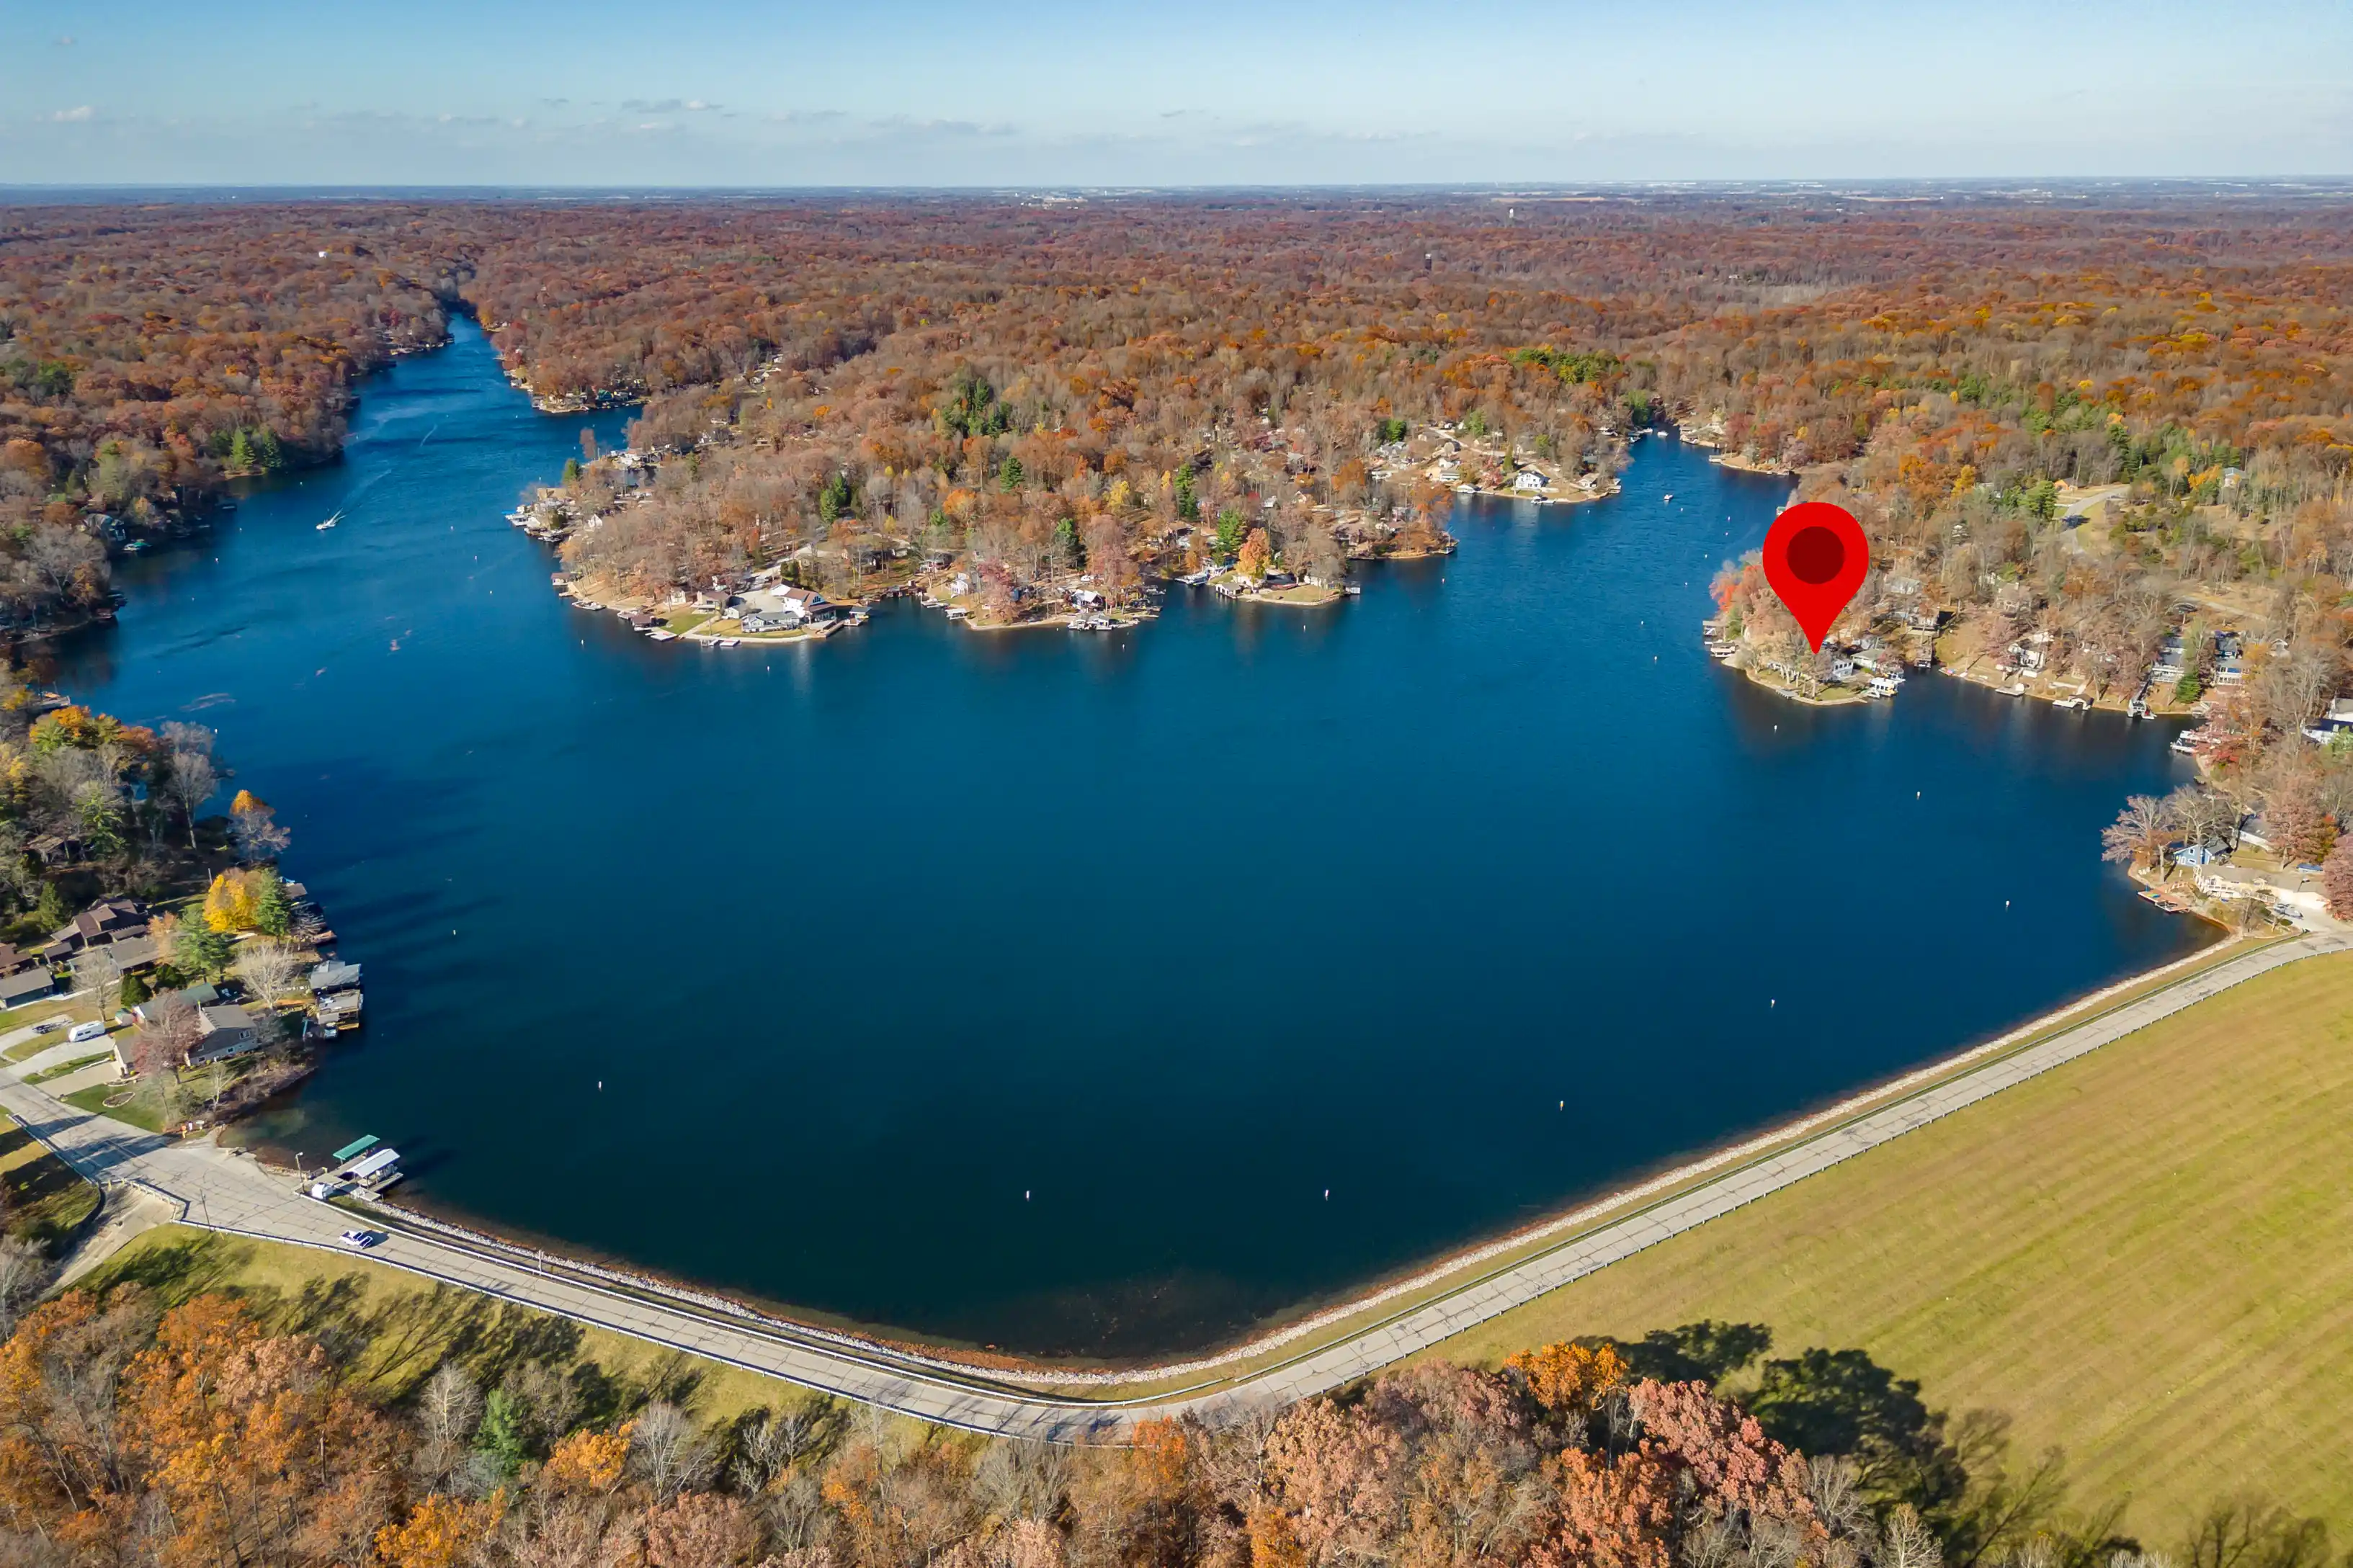 Aerial view of a tranquil lake surrounded by autumn-colored trees with houses along the shoreline, a red location marker indicating a specific point on the peninsula.